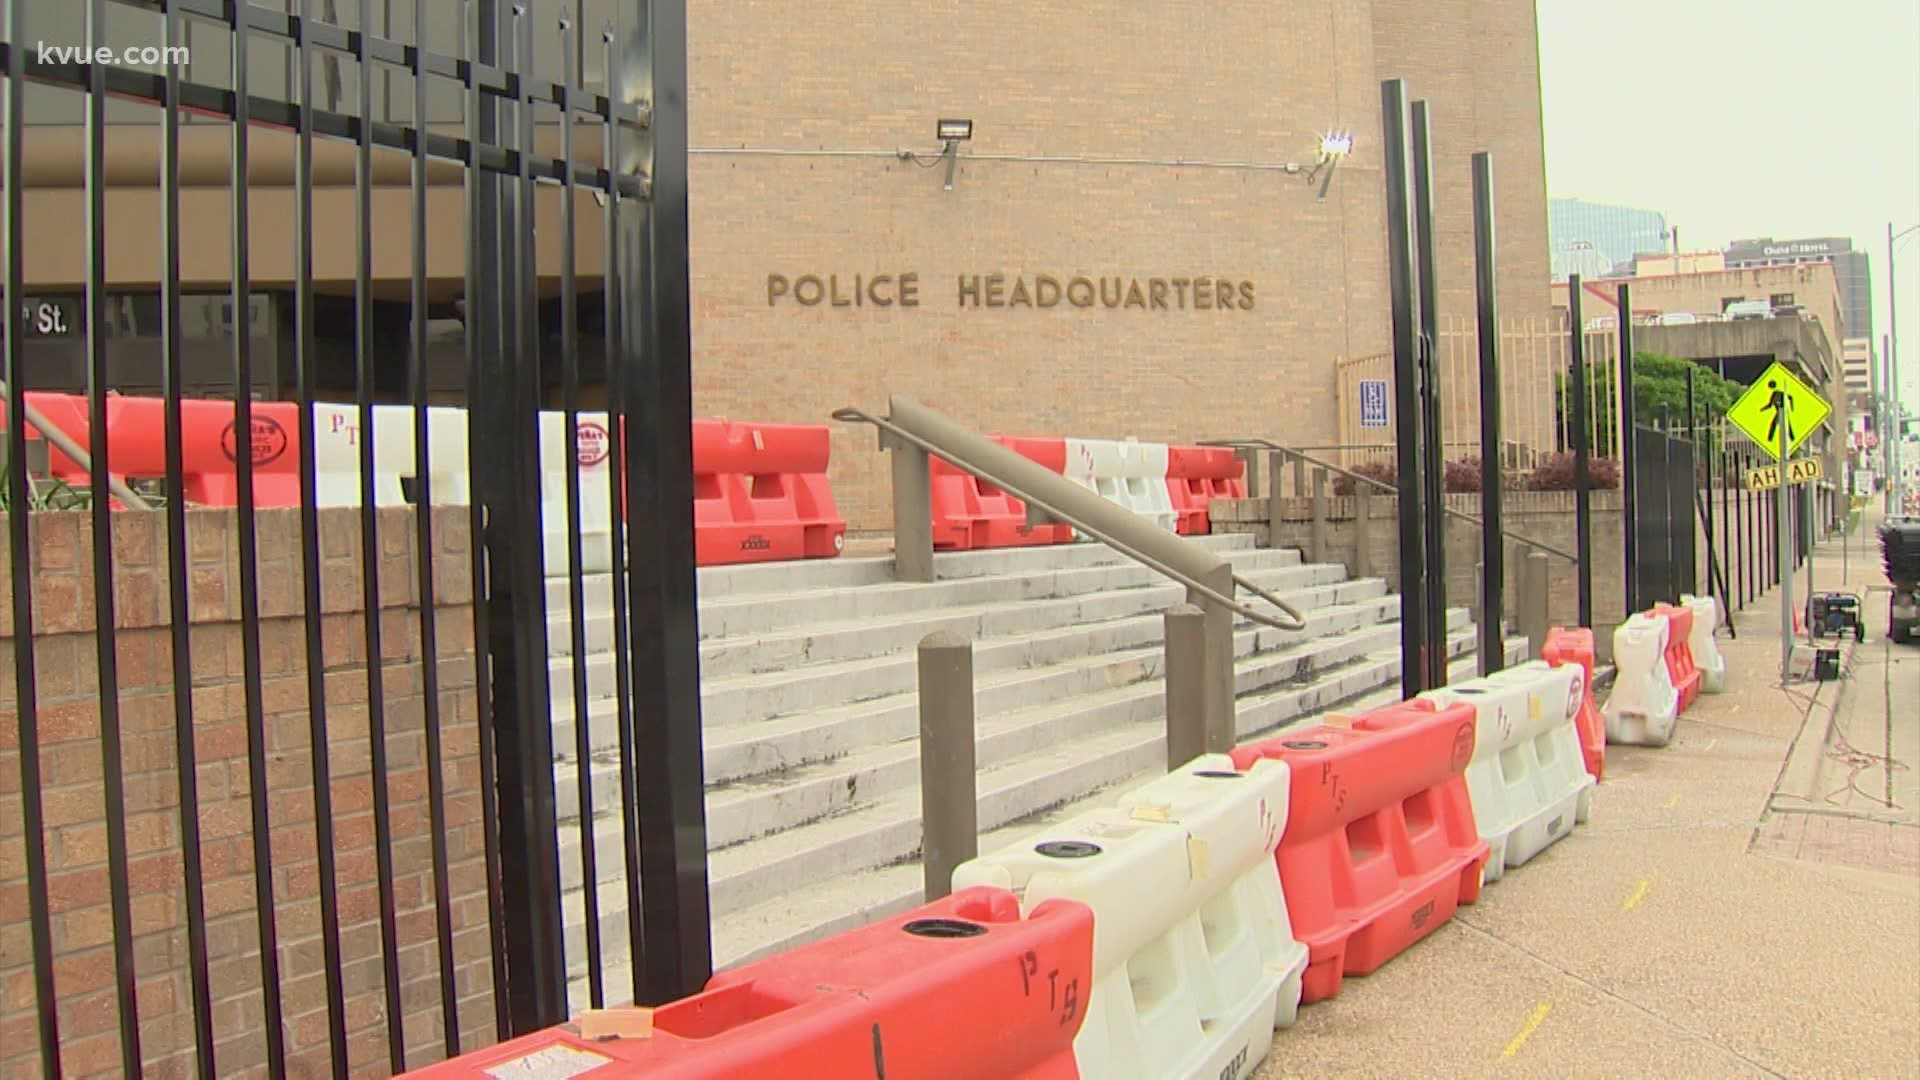 The Austin Police Department started constructing permanent fencing outside the front steps of its headquarters in Downtown Austin.